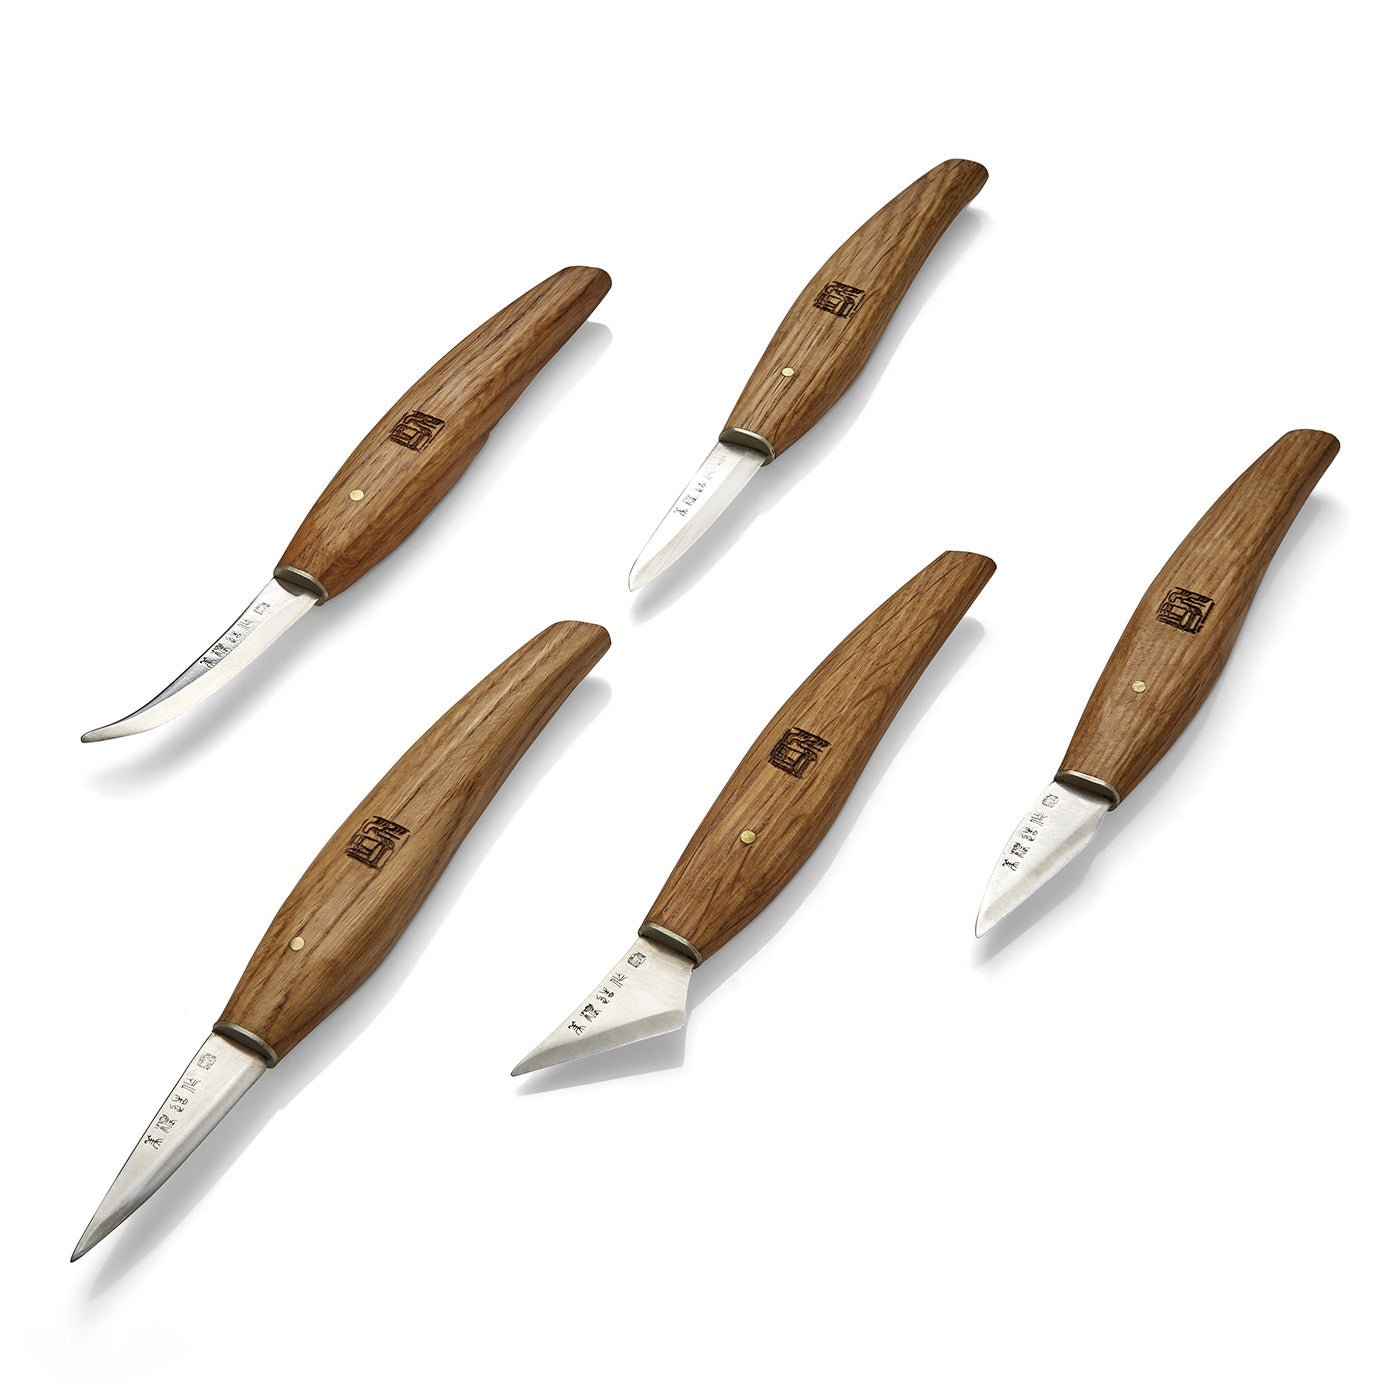 Japanese Carving Knives - Set of 5